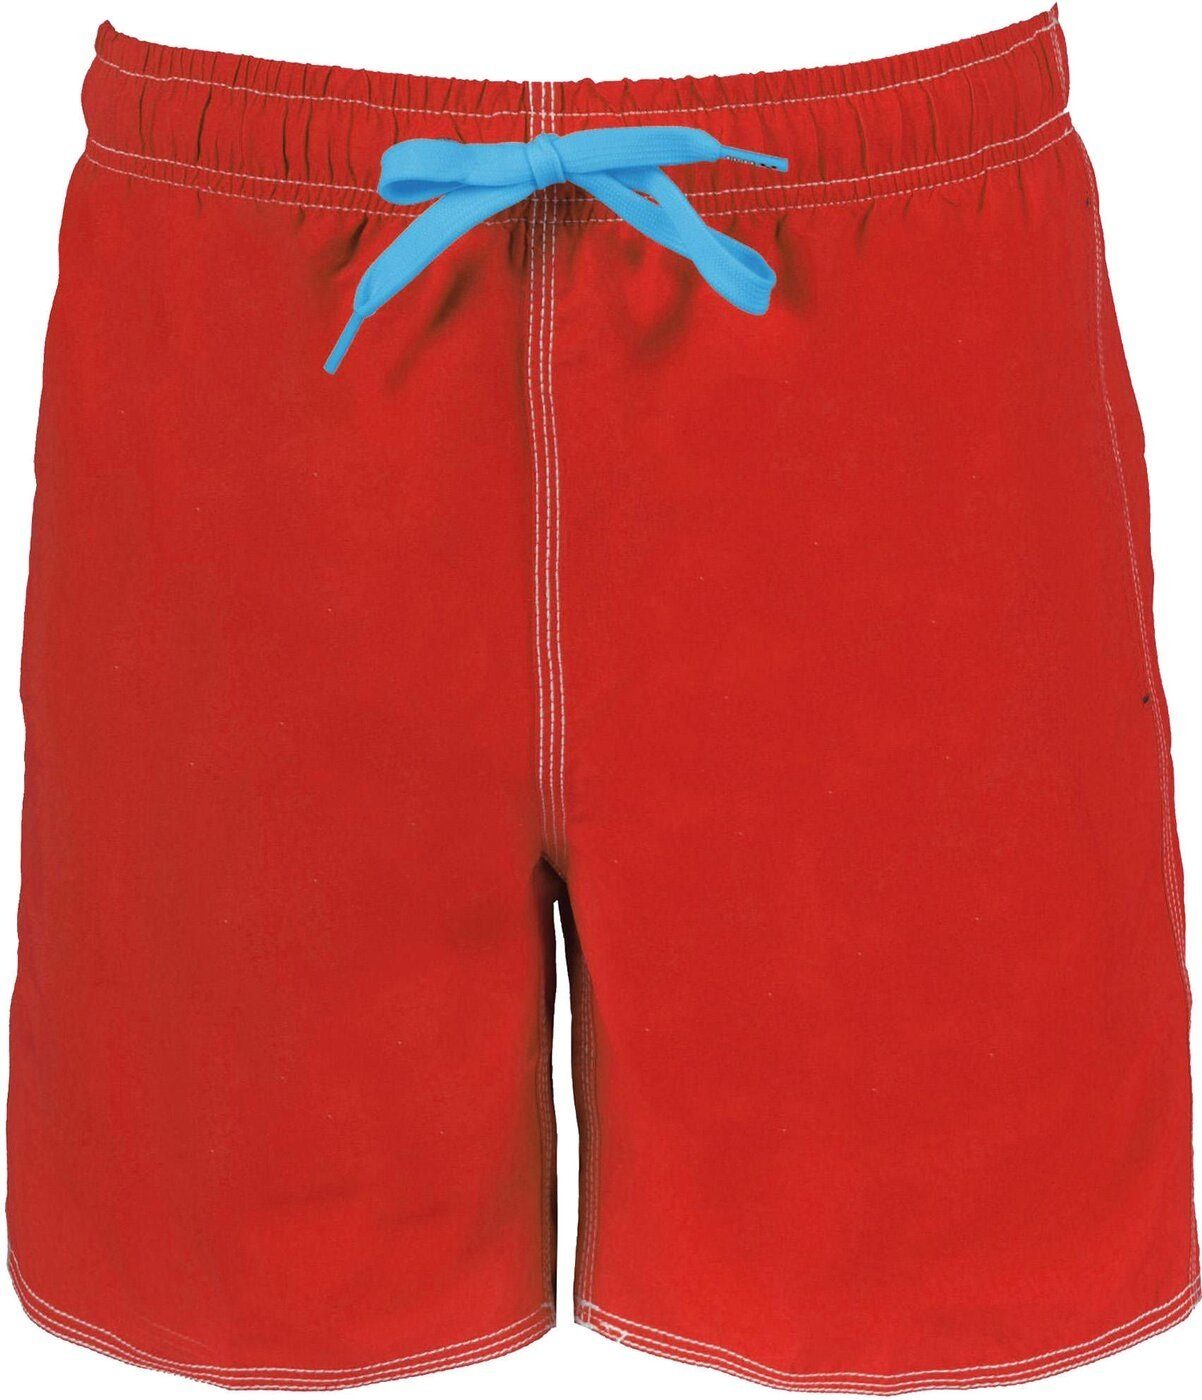 BOXER FUNDAMENTALS SOLID RED-TURQUOISE Badeshorts 48 Arena